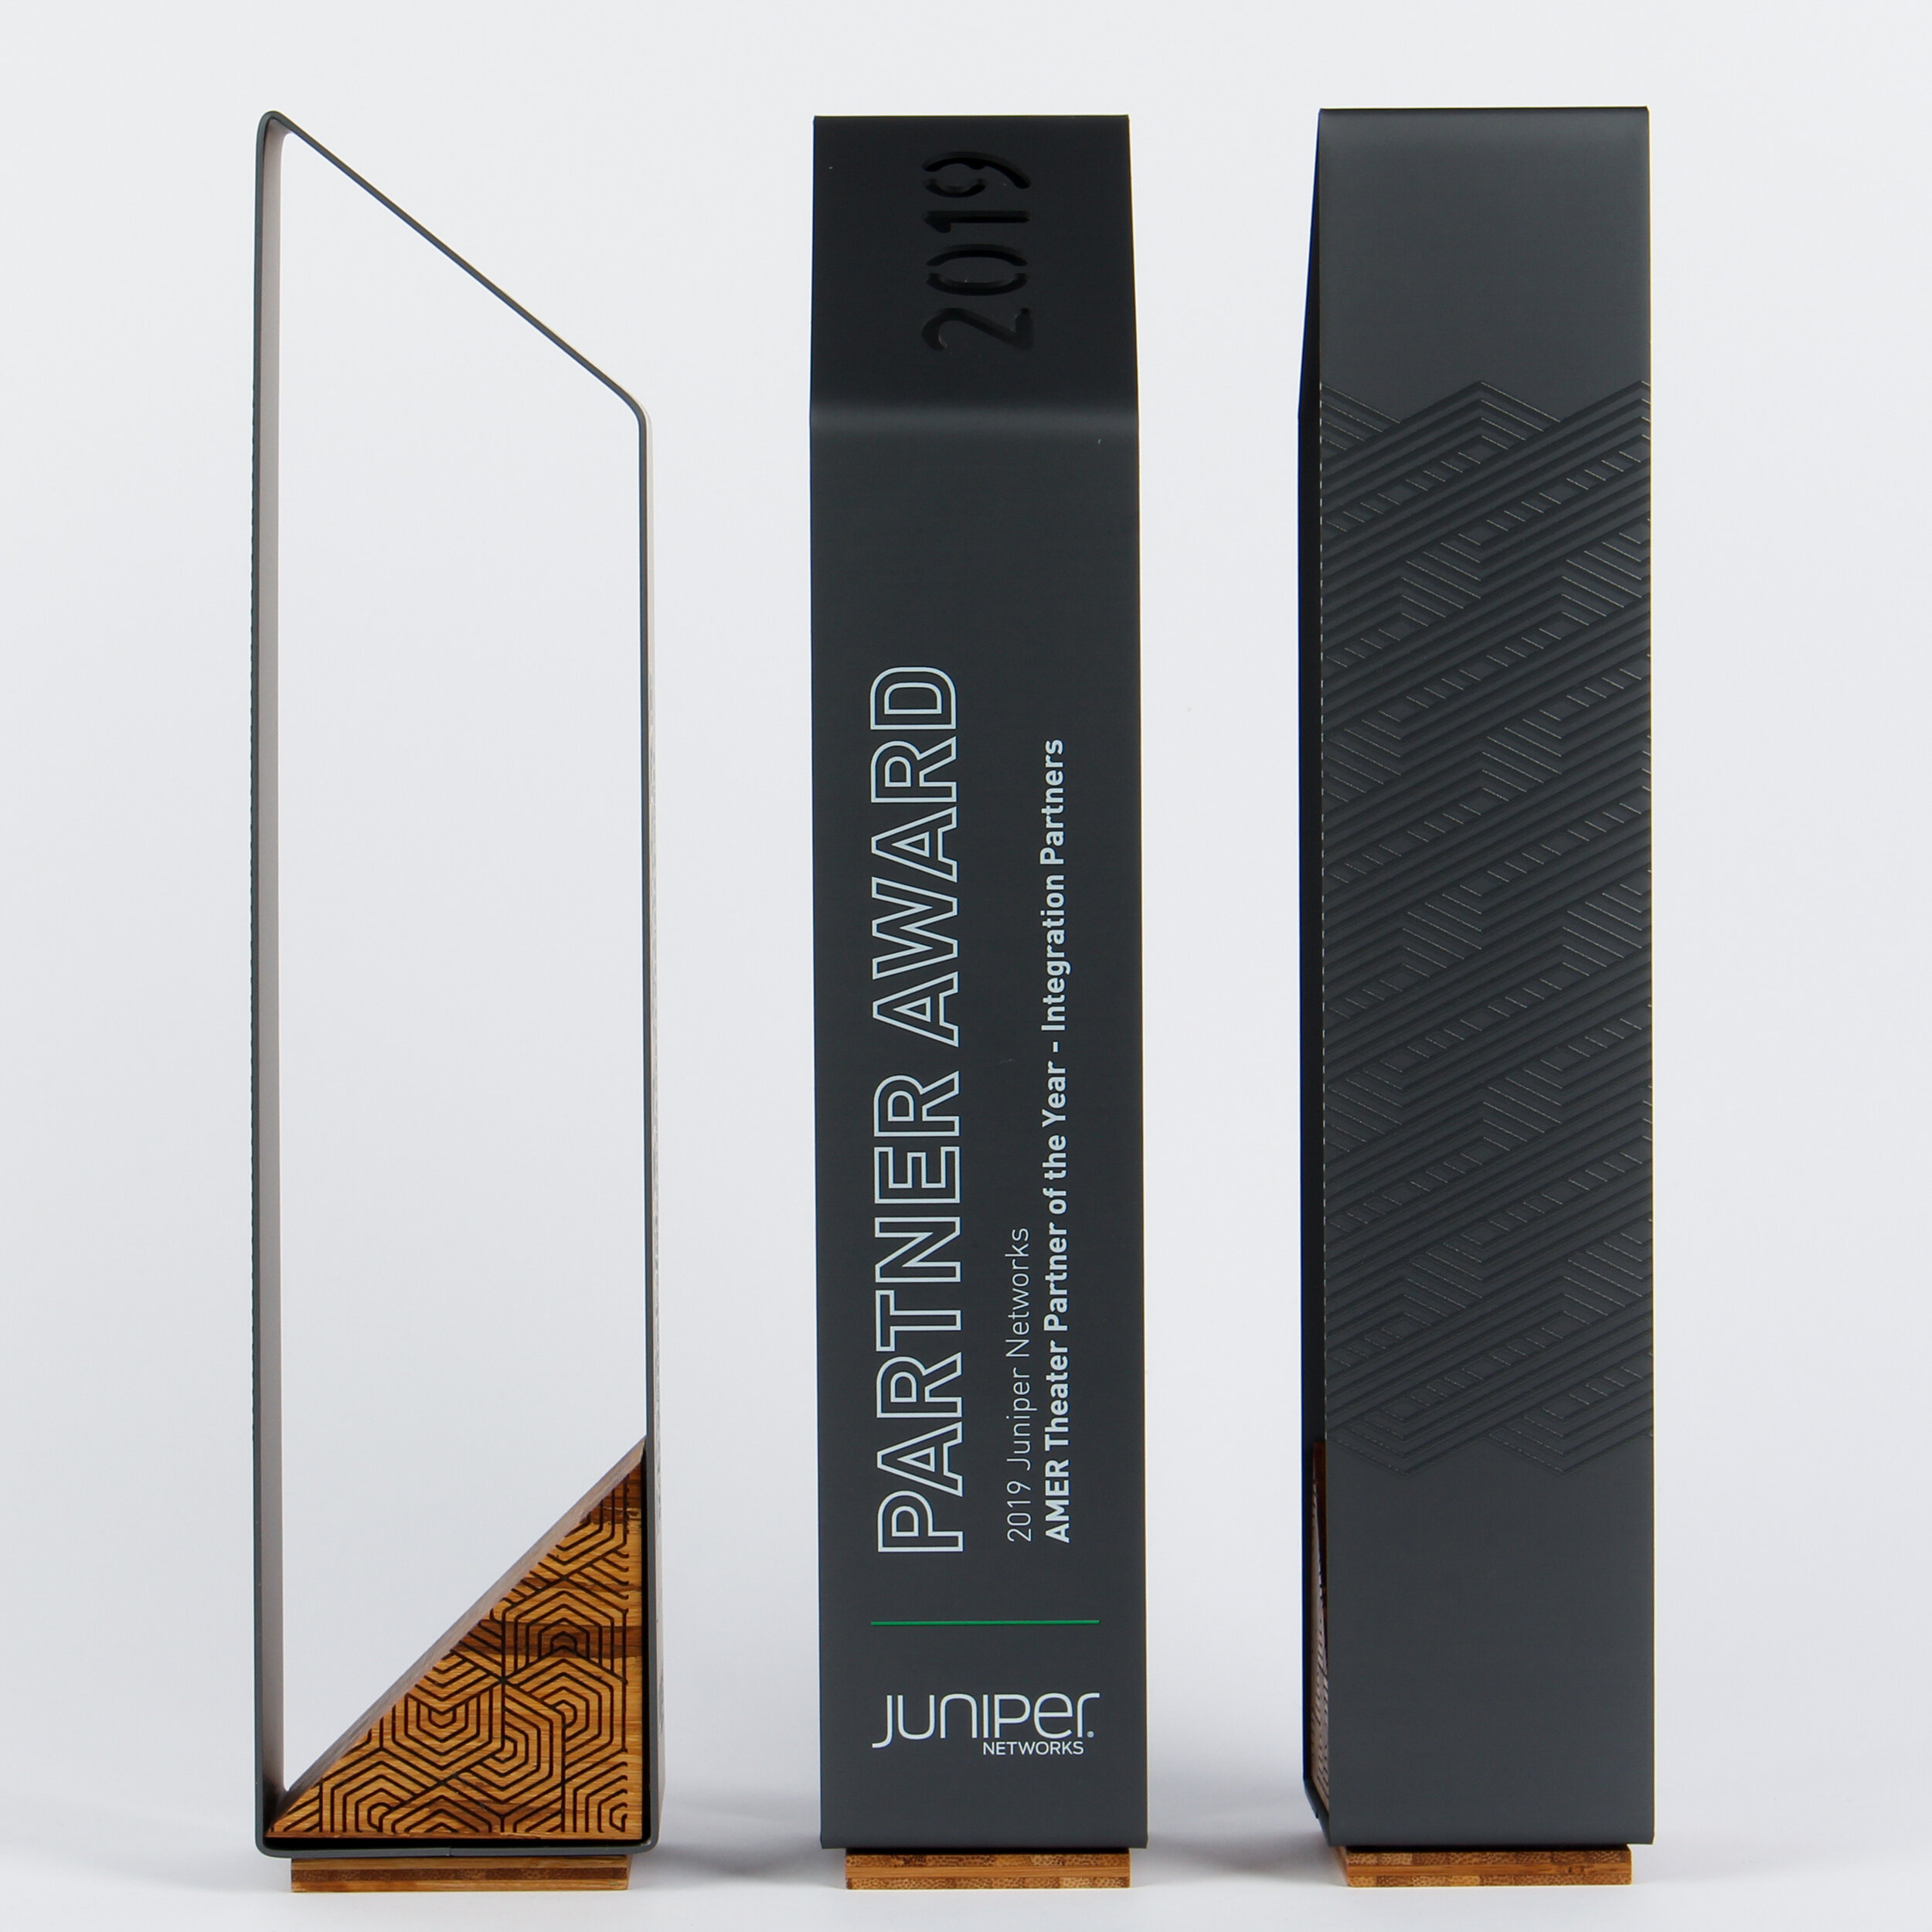 Juniper Networks partner awards and trophies. Modern and beautiful. Great for corporate recognition or service awards and trophies.  